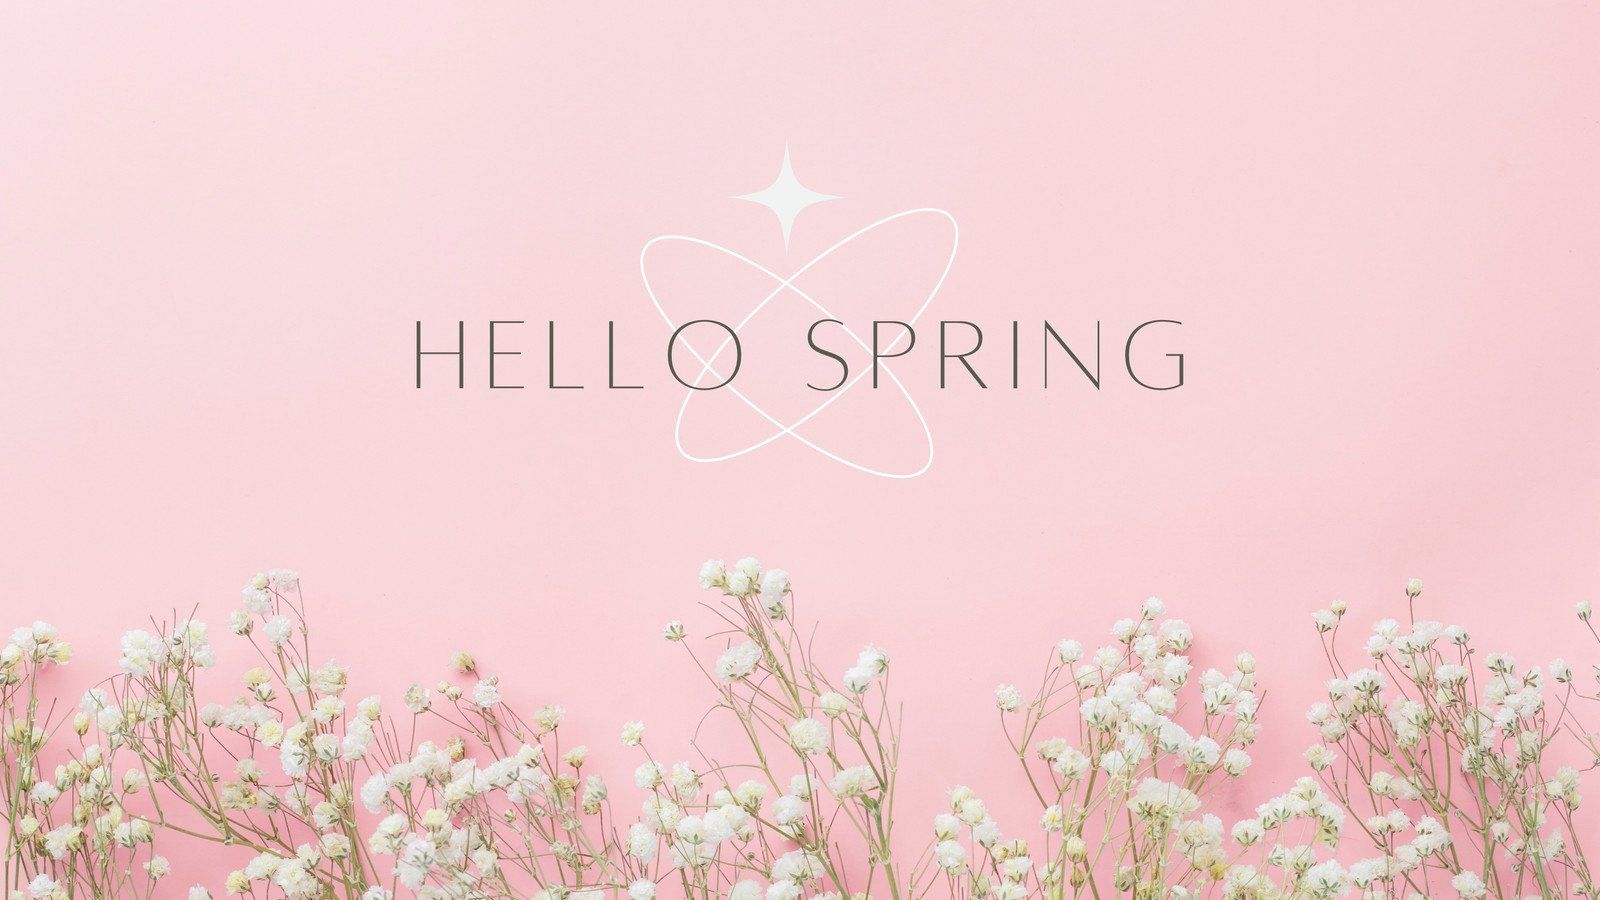 Hello Spring wallpaper with white flowers on a pink background - Pink